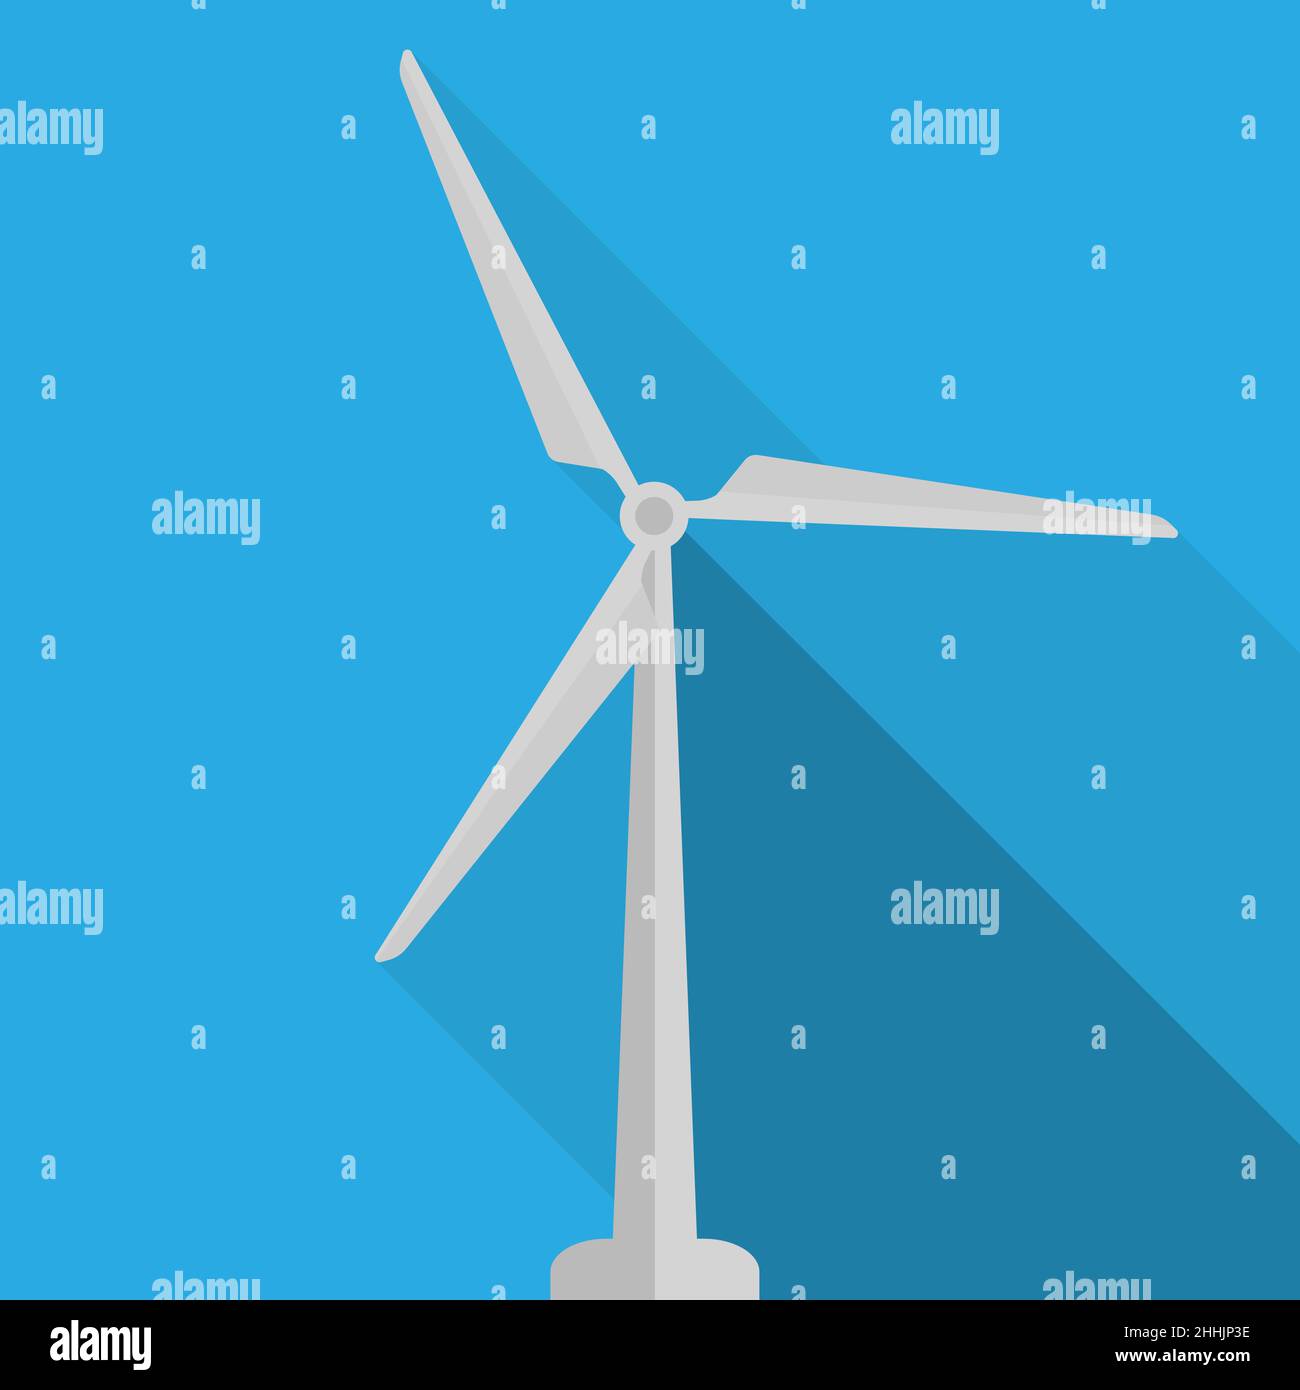 wind turbine with drop shadow on blue background, wind power plant symbol, vector illustration Stock Vector